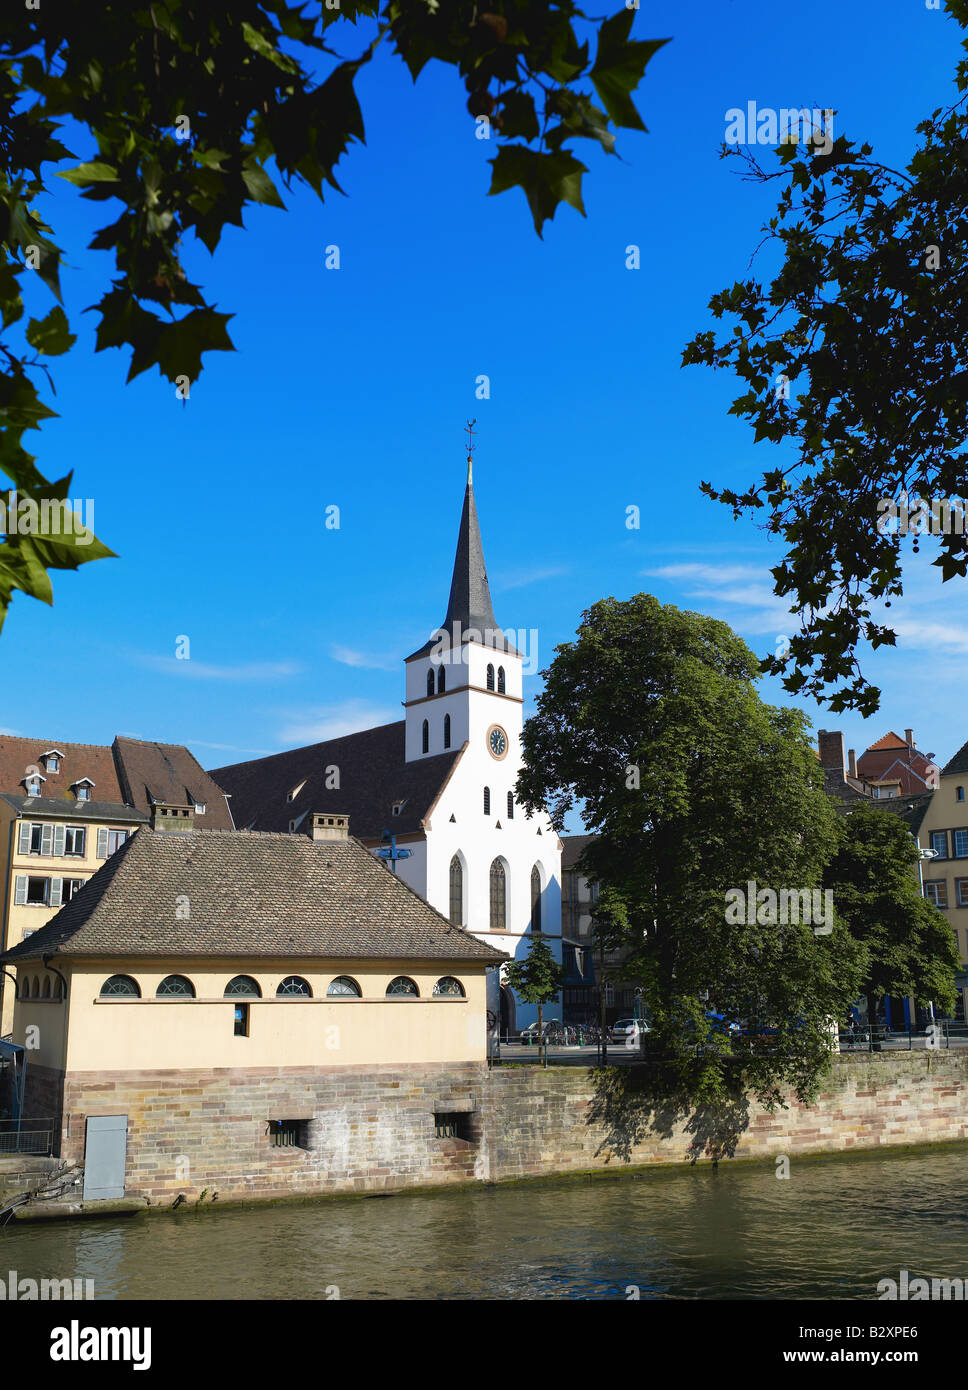 ST-GUILLAUME PROTESTANT CHURCH 14th Century STRASBOURG ALSACE FRANCE Stock Photo